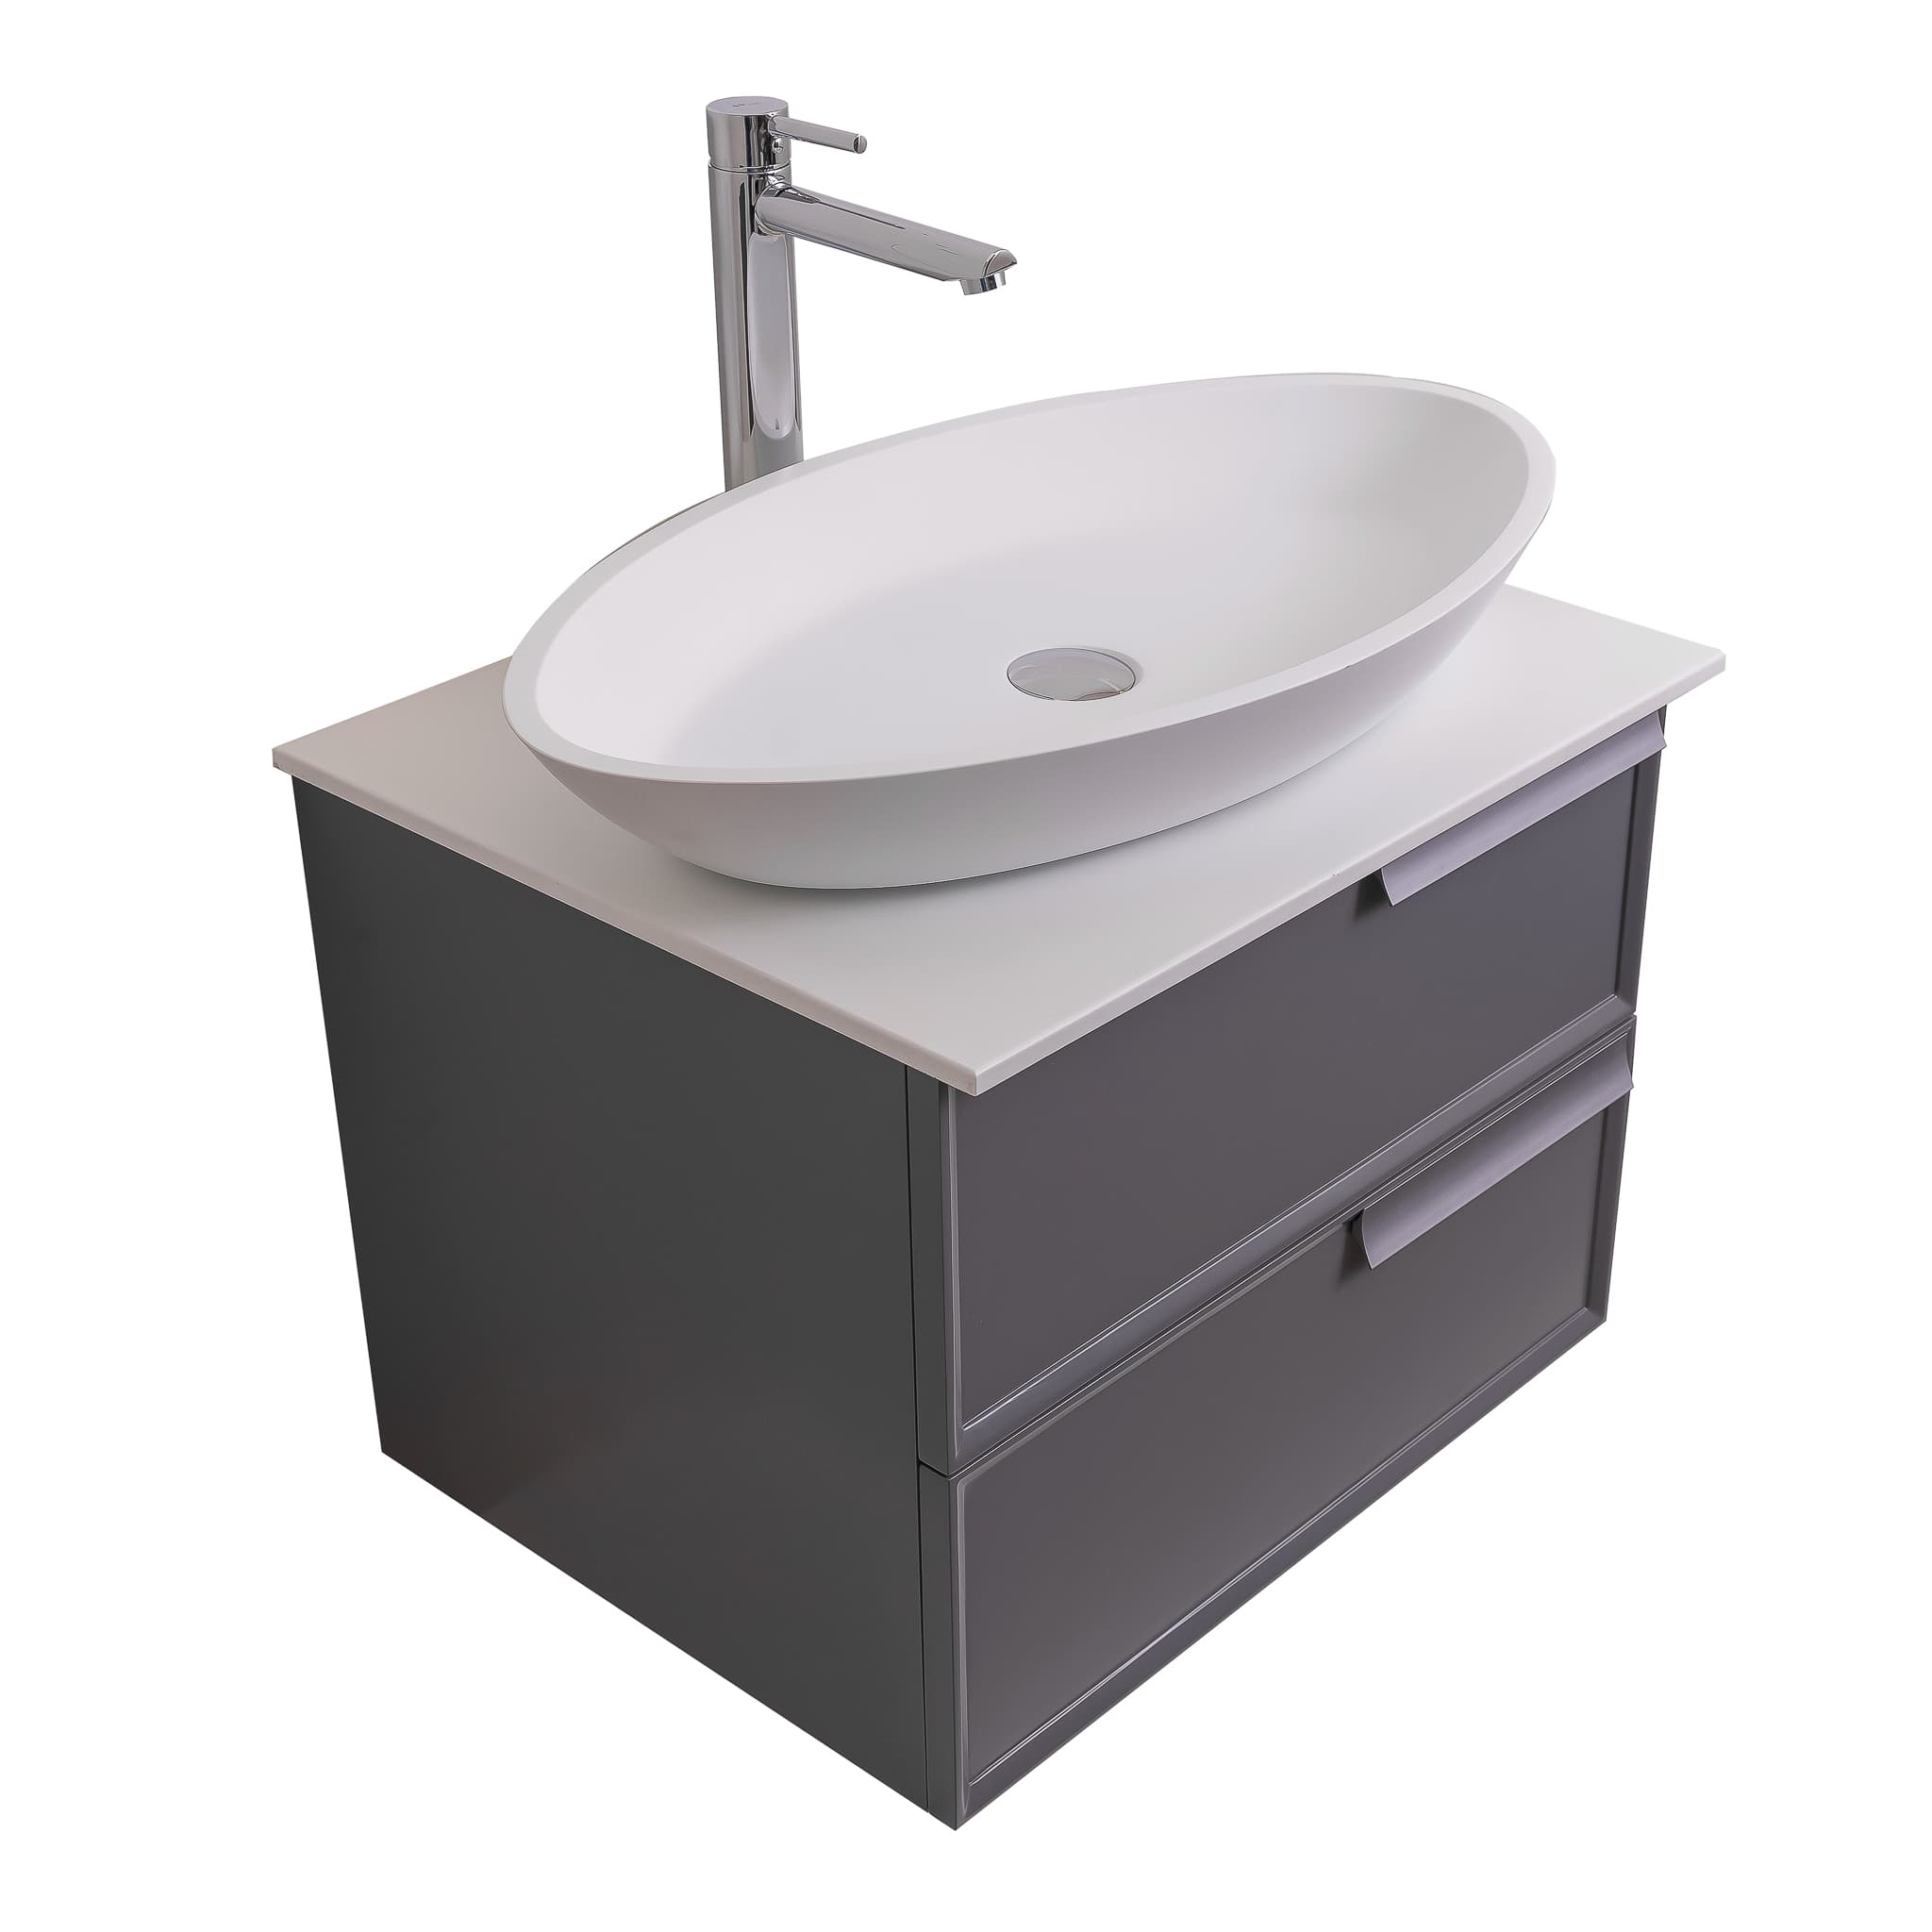 Garda 23.5 Matte Grey Cabinet, Solid Surface Flat White Counter and Oval Solid Surface White Basin 1305, Wall Mounted Modern Vanity Set